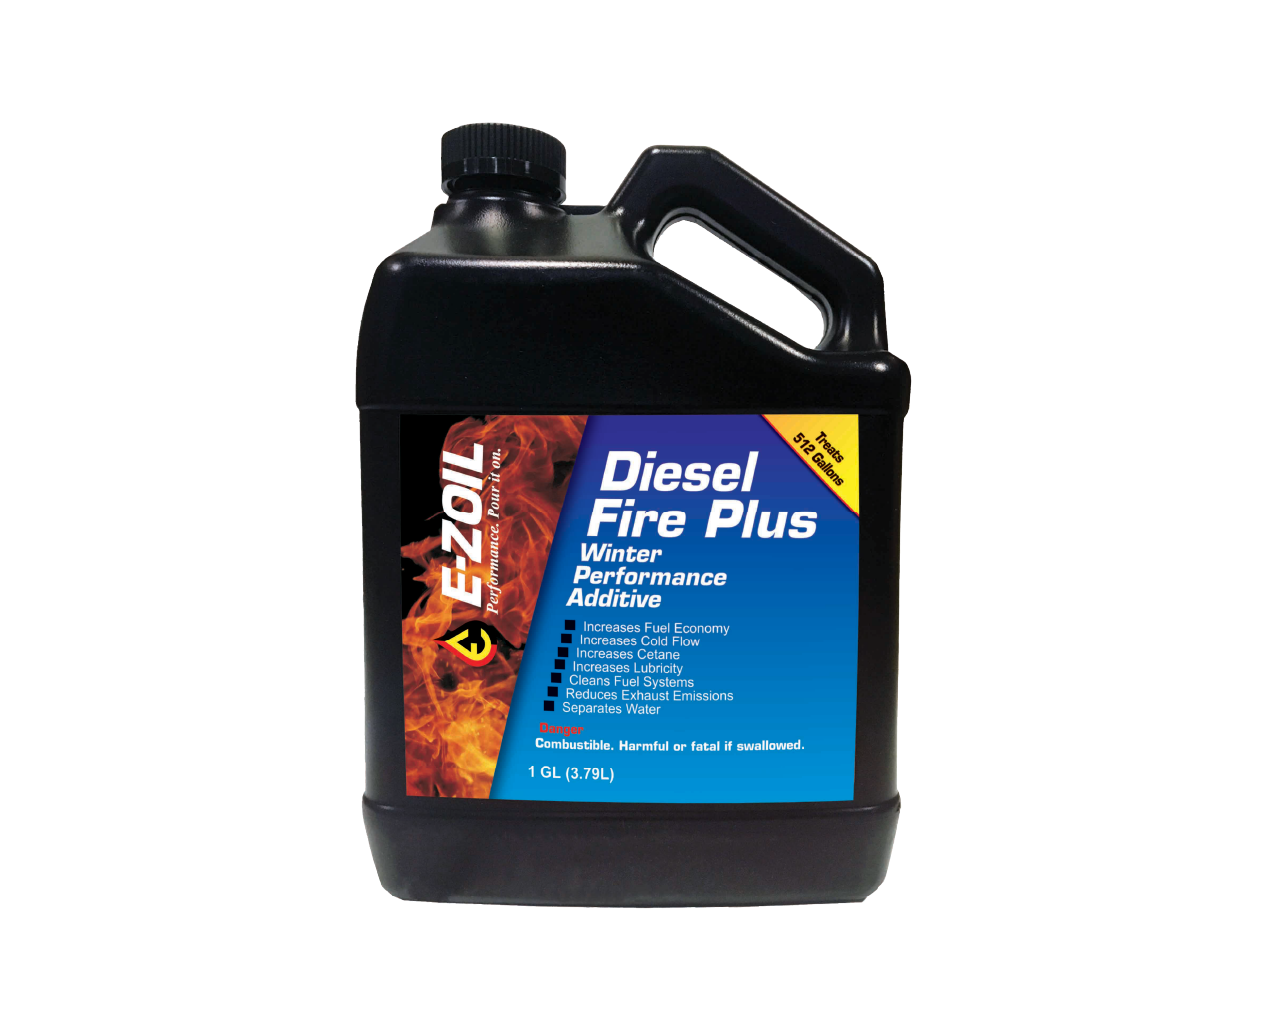 Exergy Performance Winter Diesel Fuel Additive